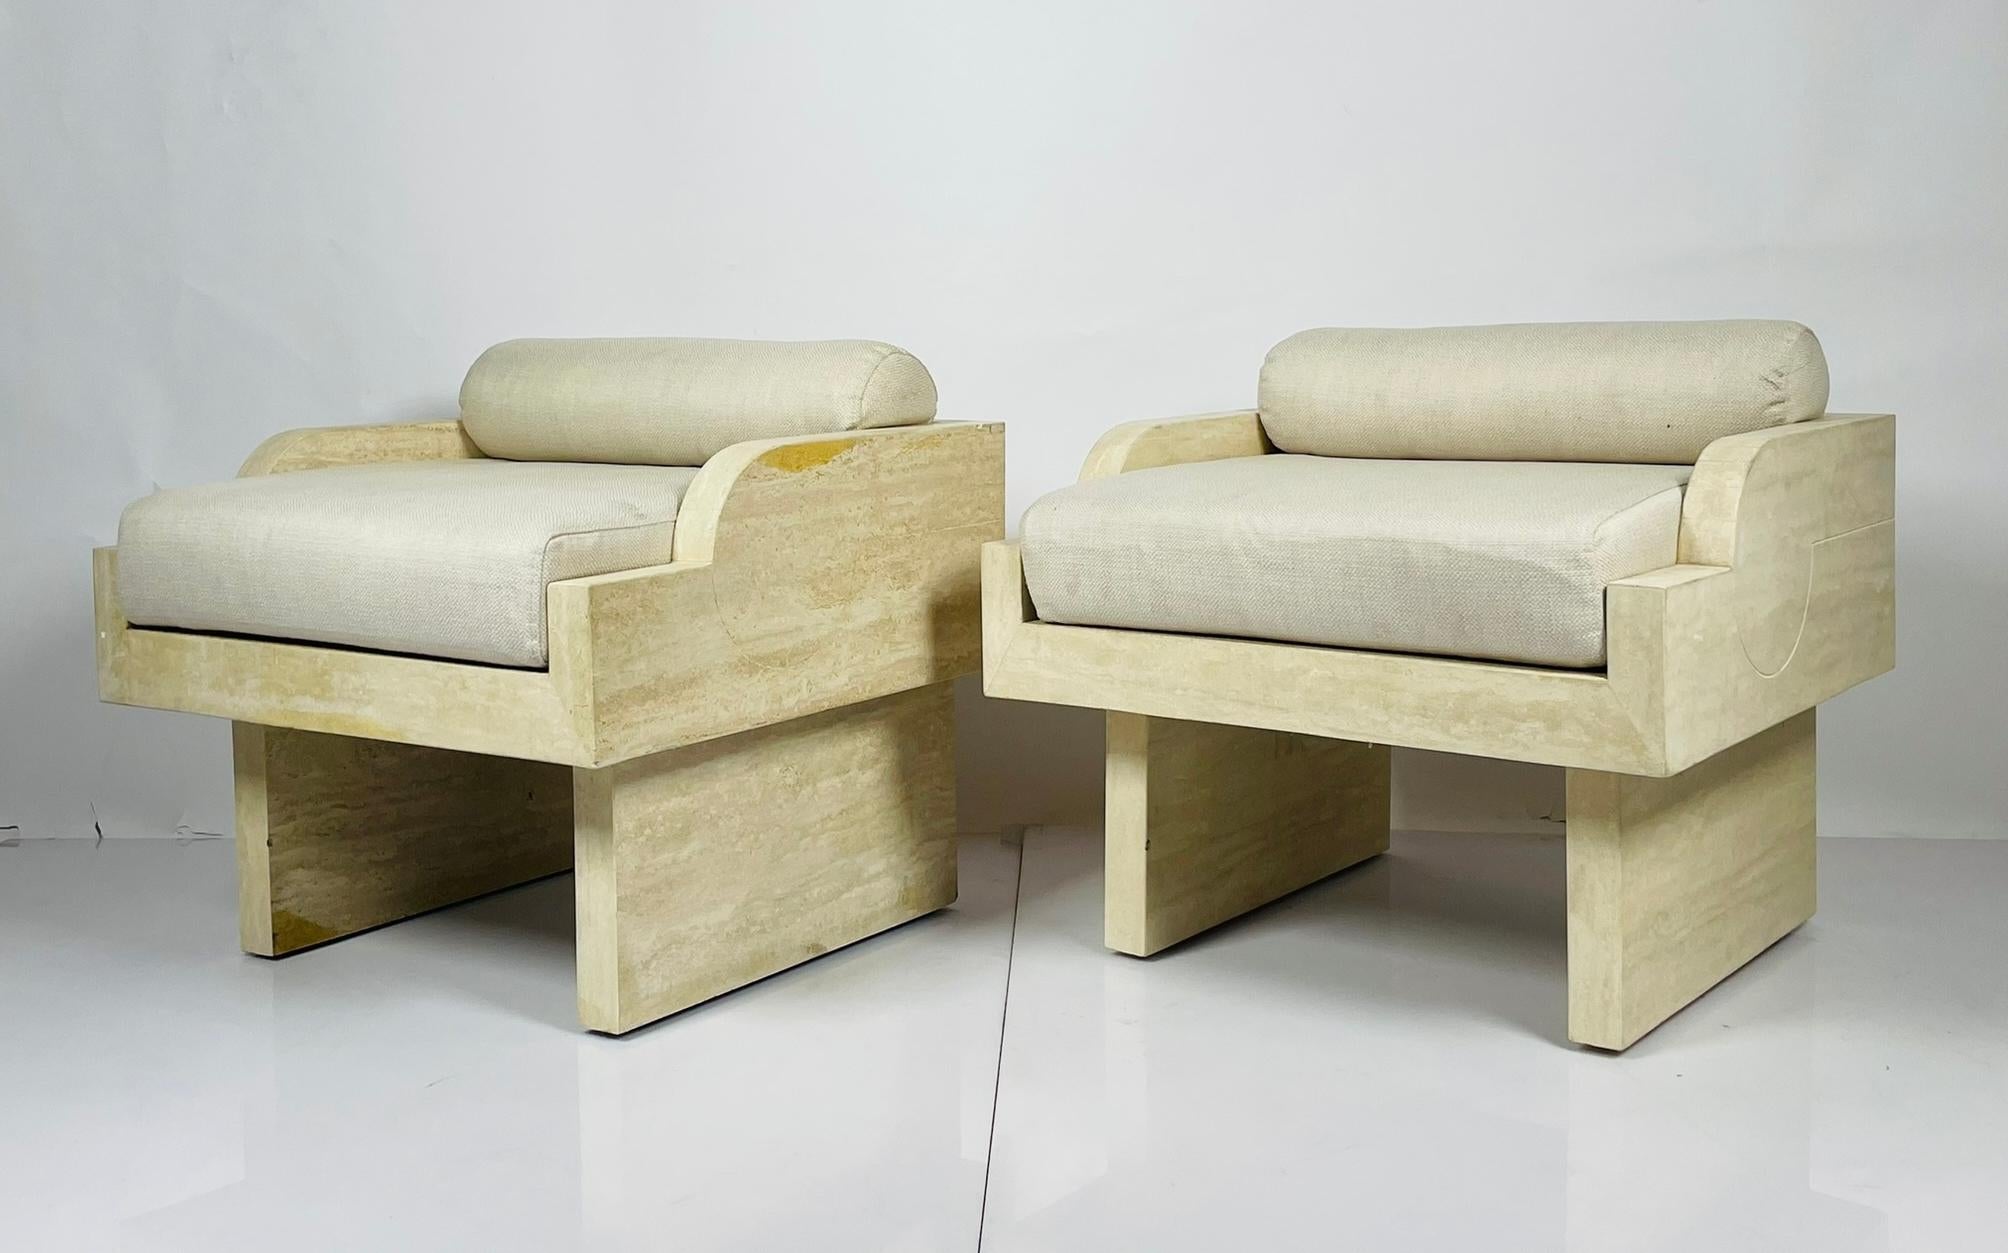 Hand-Crafted Pair of Travertine Arm Chairs Attb to Stéphane Parmentier For Sale